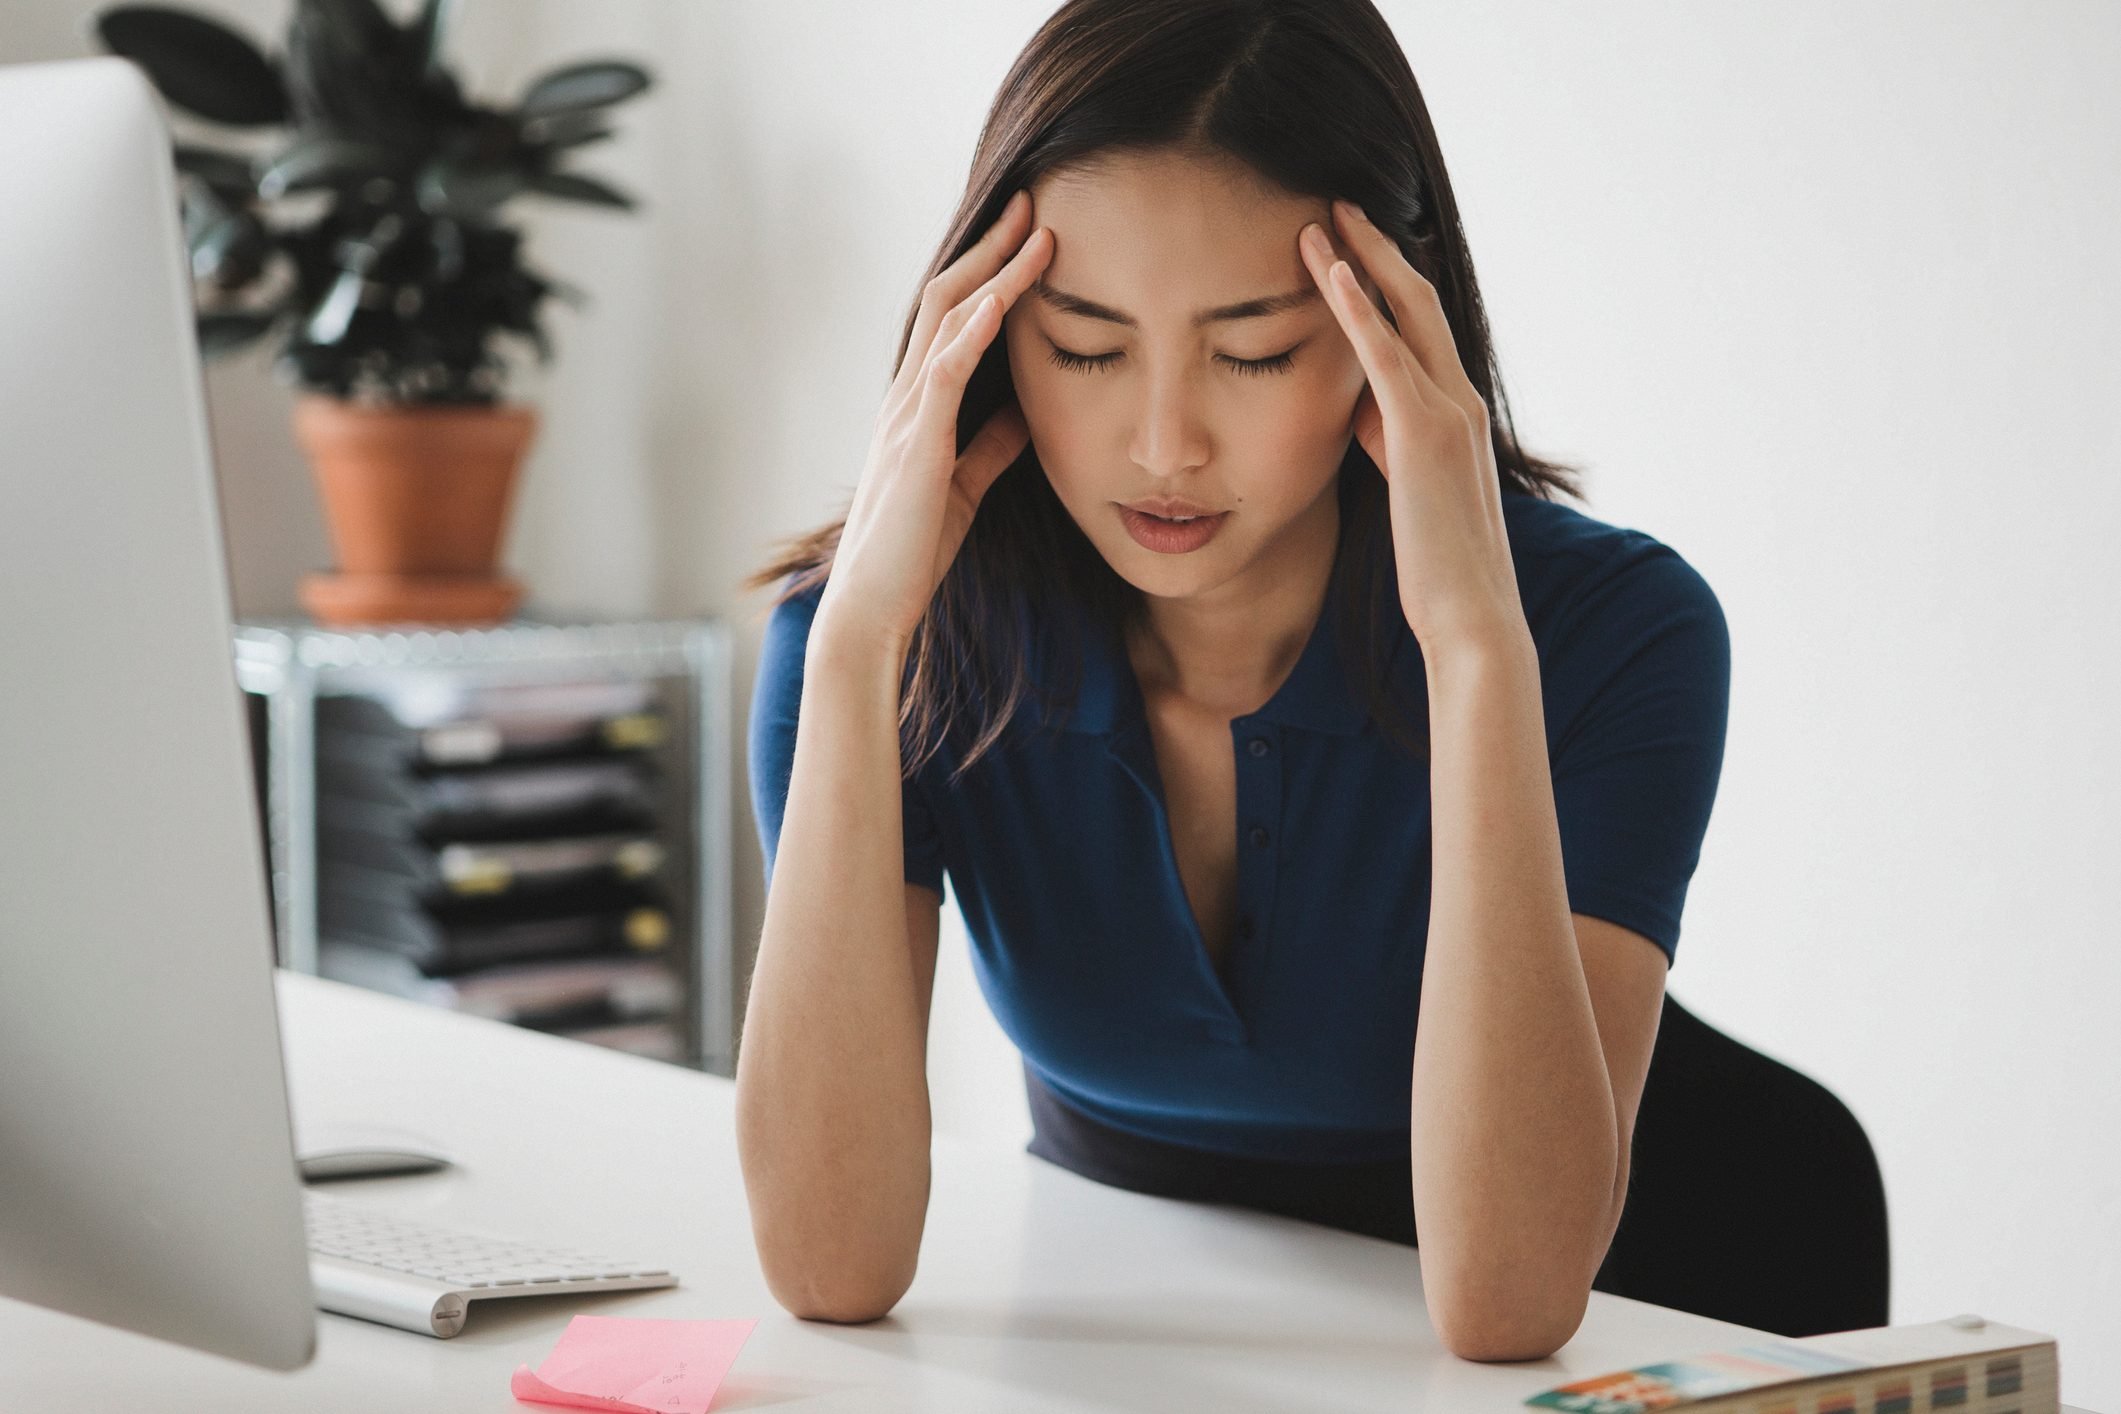 What's the Difference Between a Migraine and a Headache?